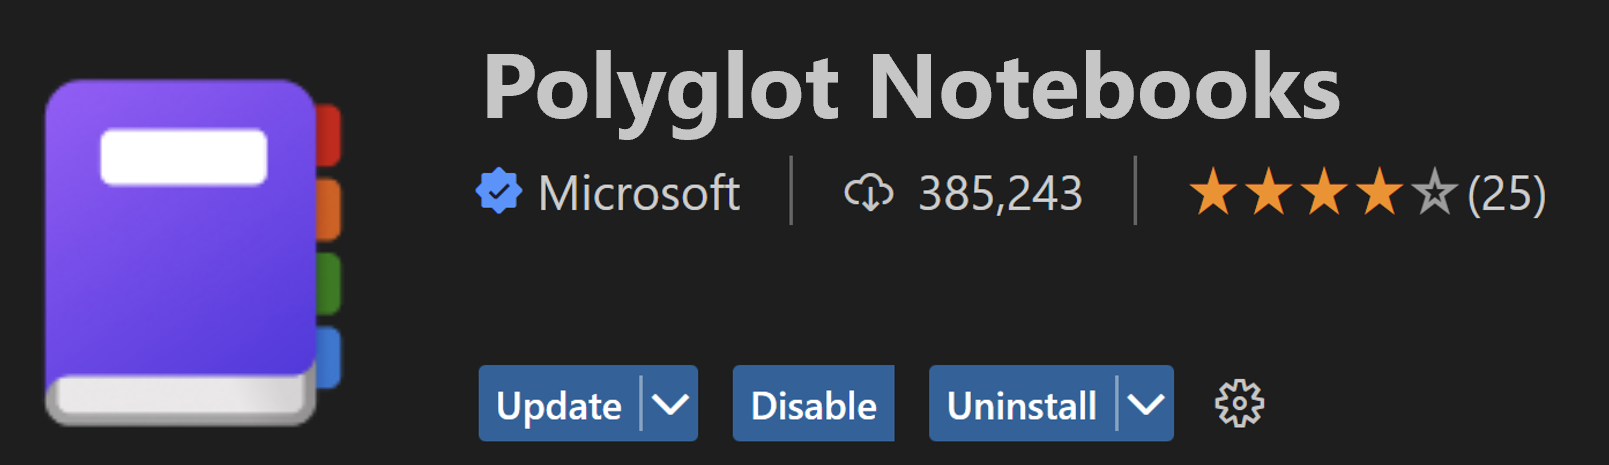 New Polyglot Notebooks extension